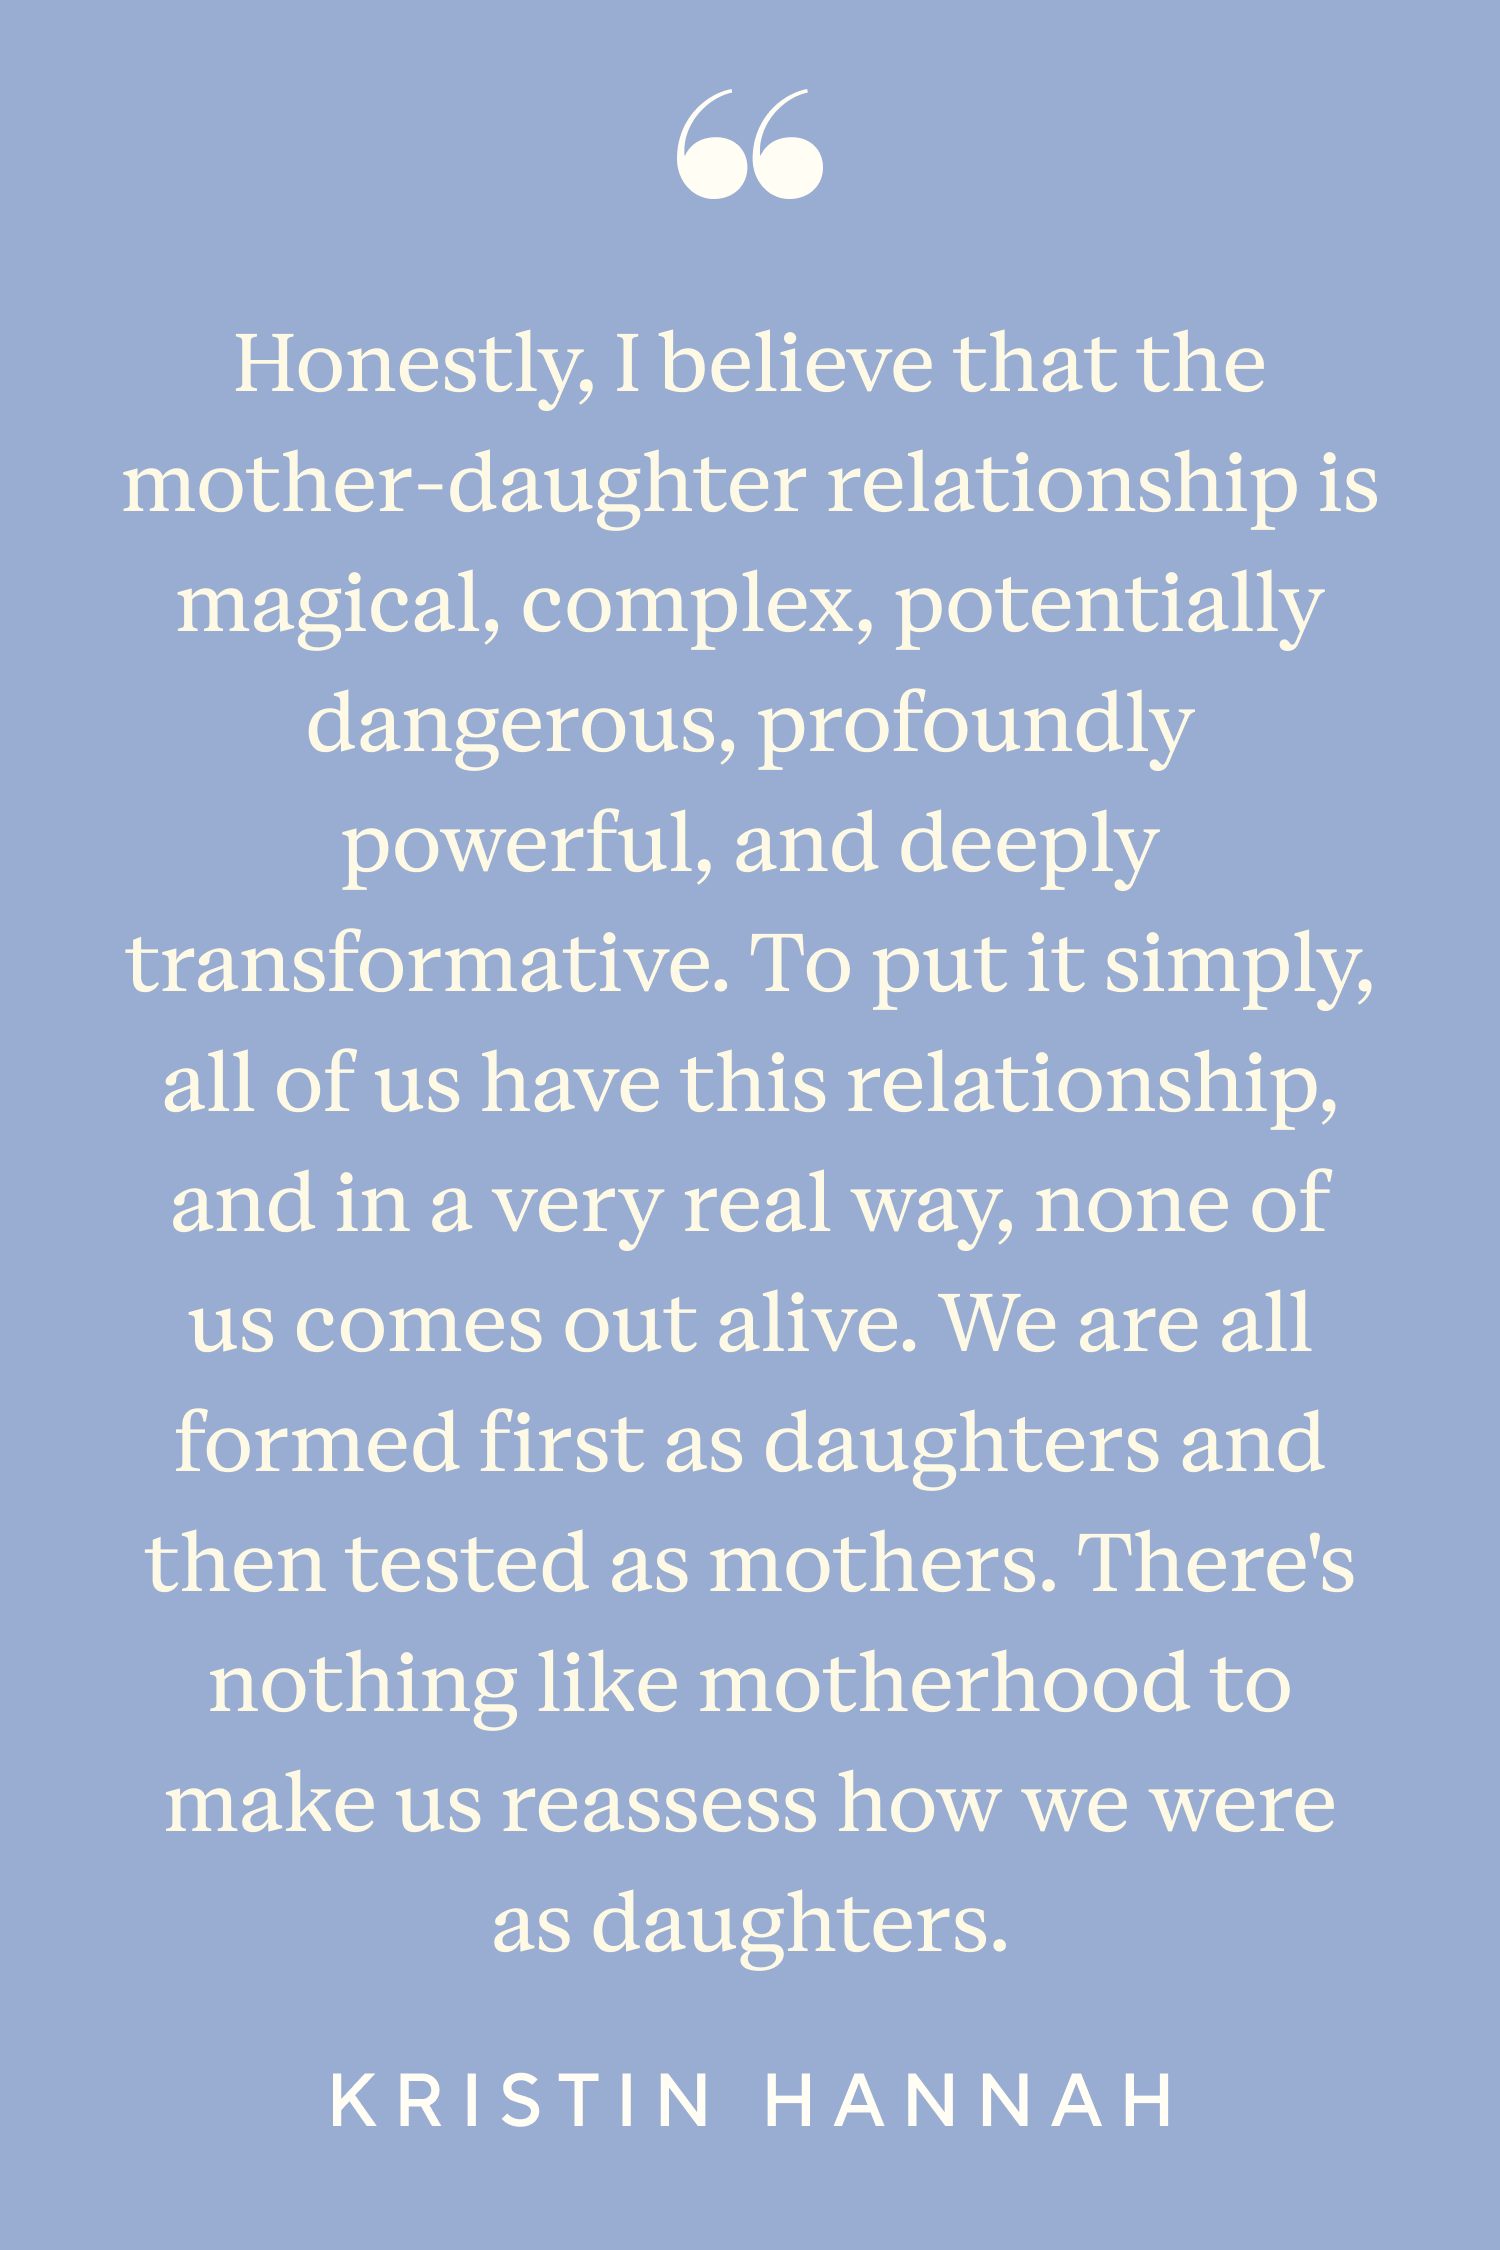 quotes about mothers and daughters